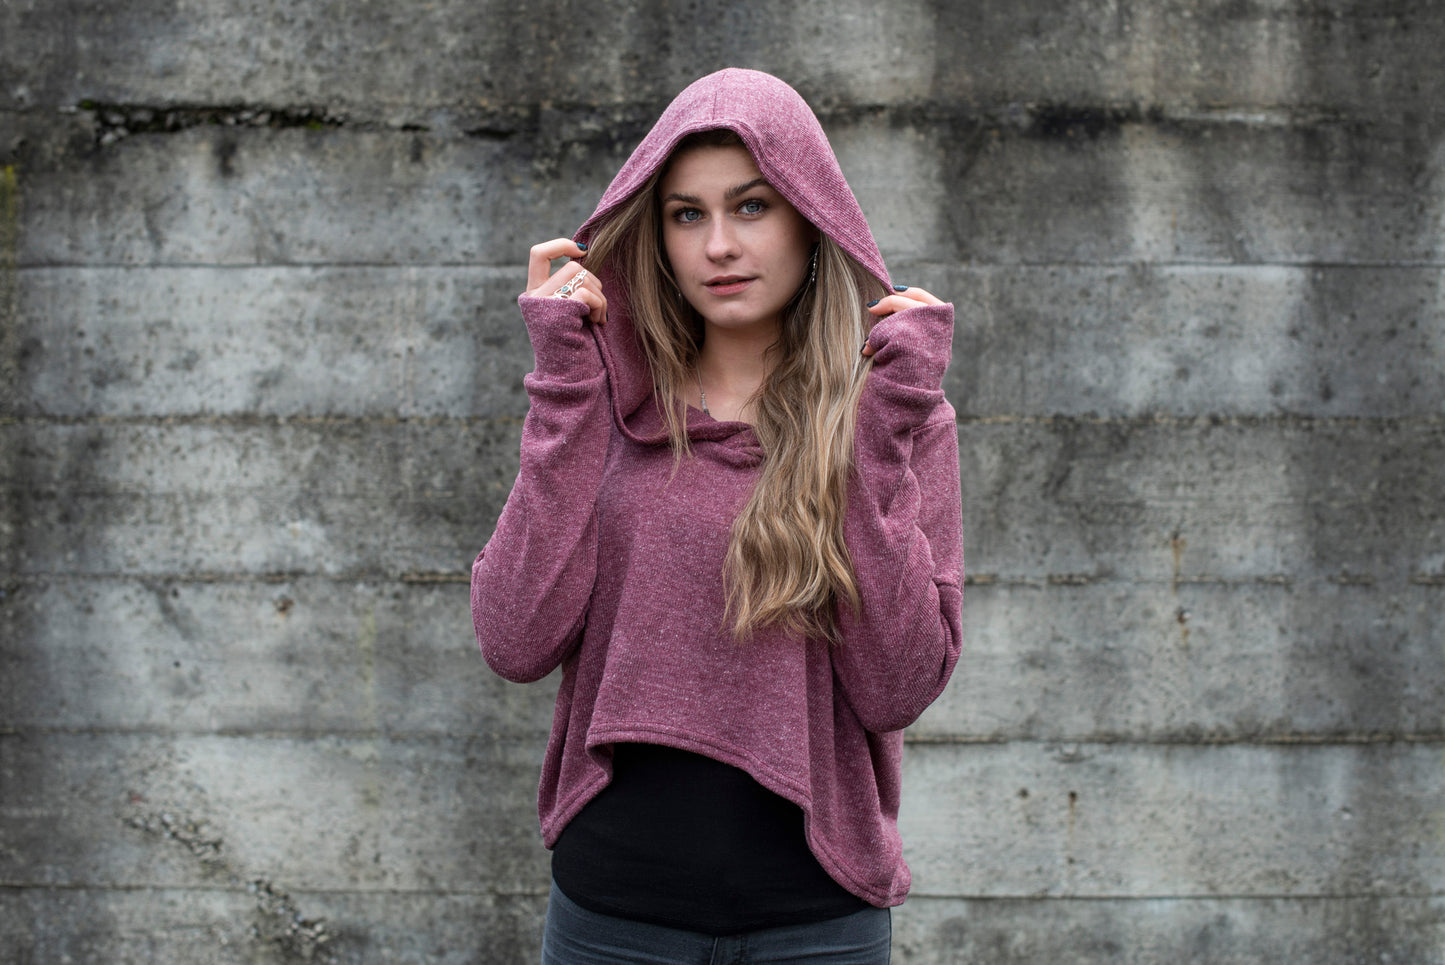 half-length, plain-colored knitted sweater with hood and thumbholes in rosé red 